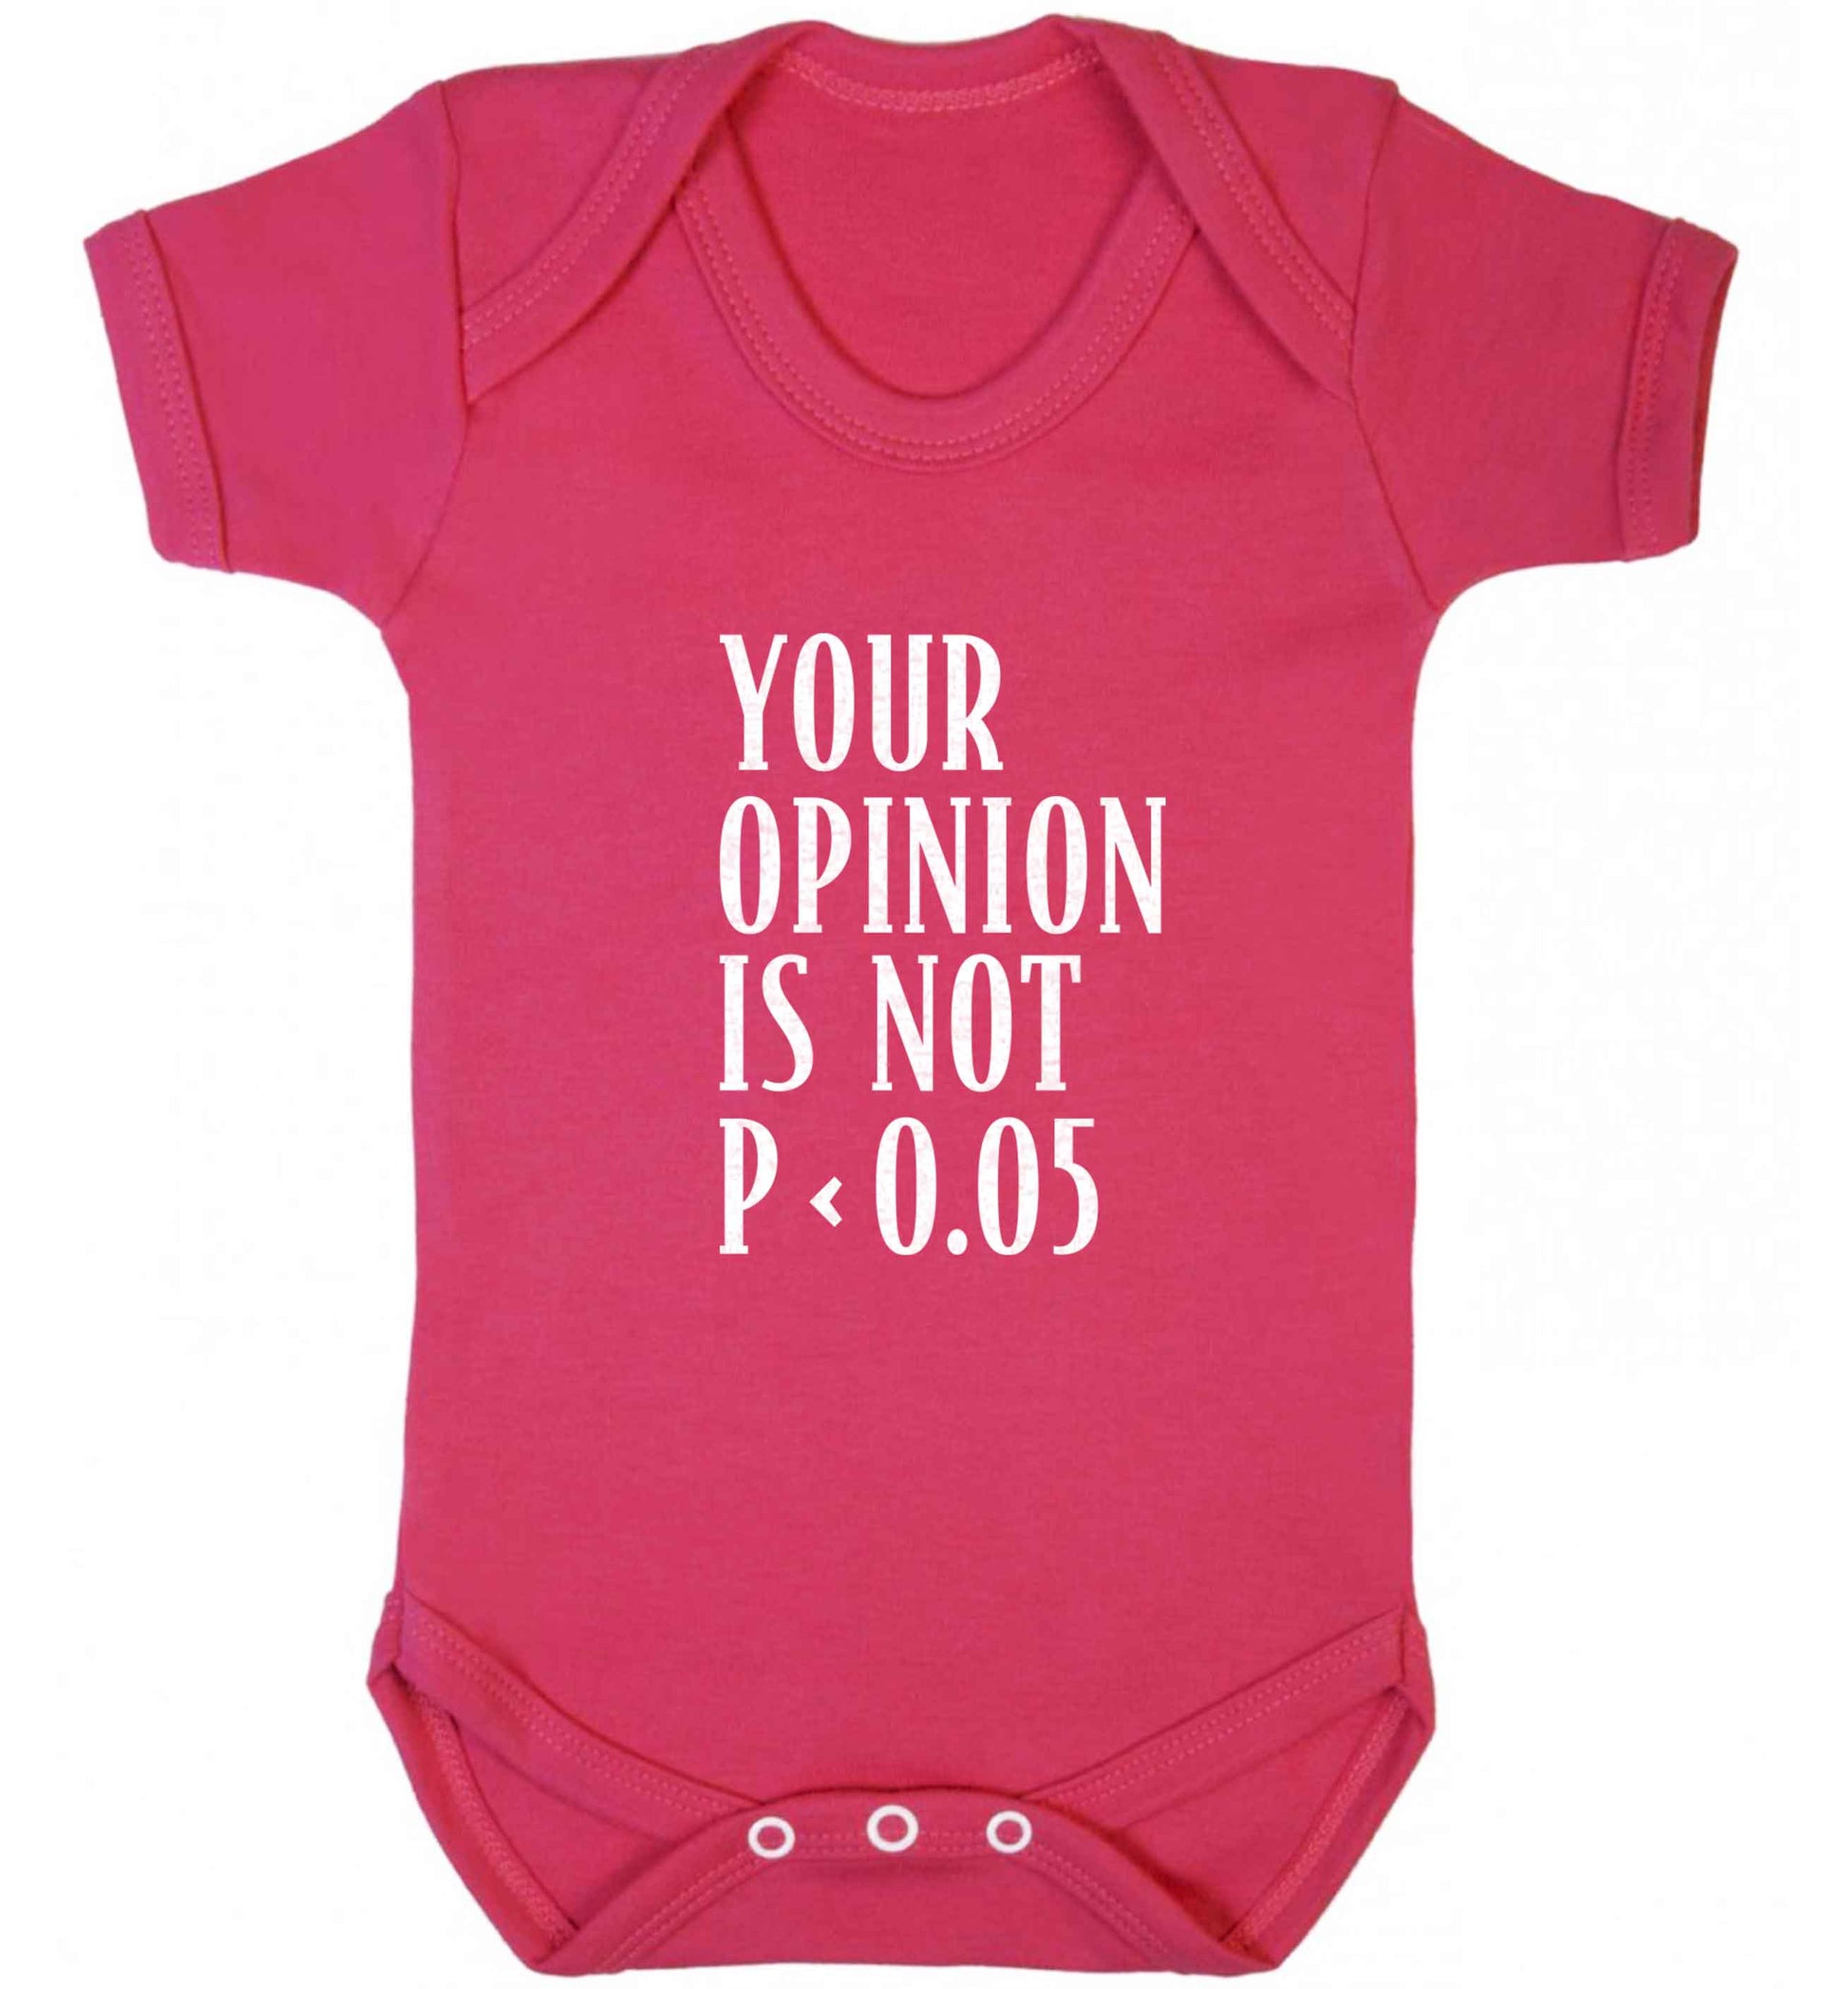 Your opinion is not P < 0.05baby vest dark pink 18-24 months